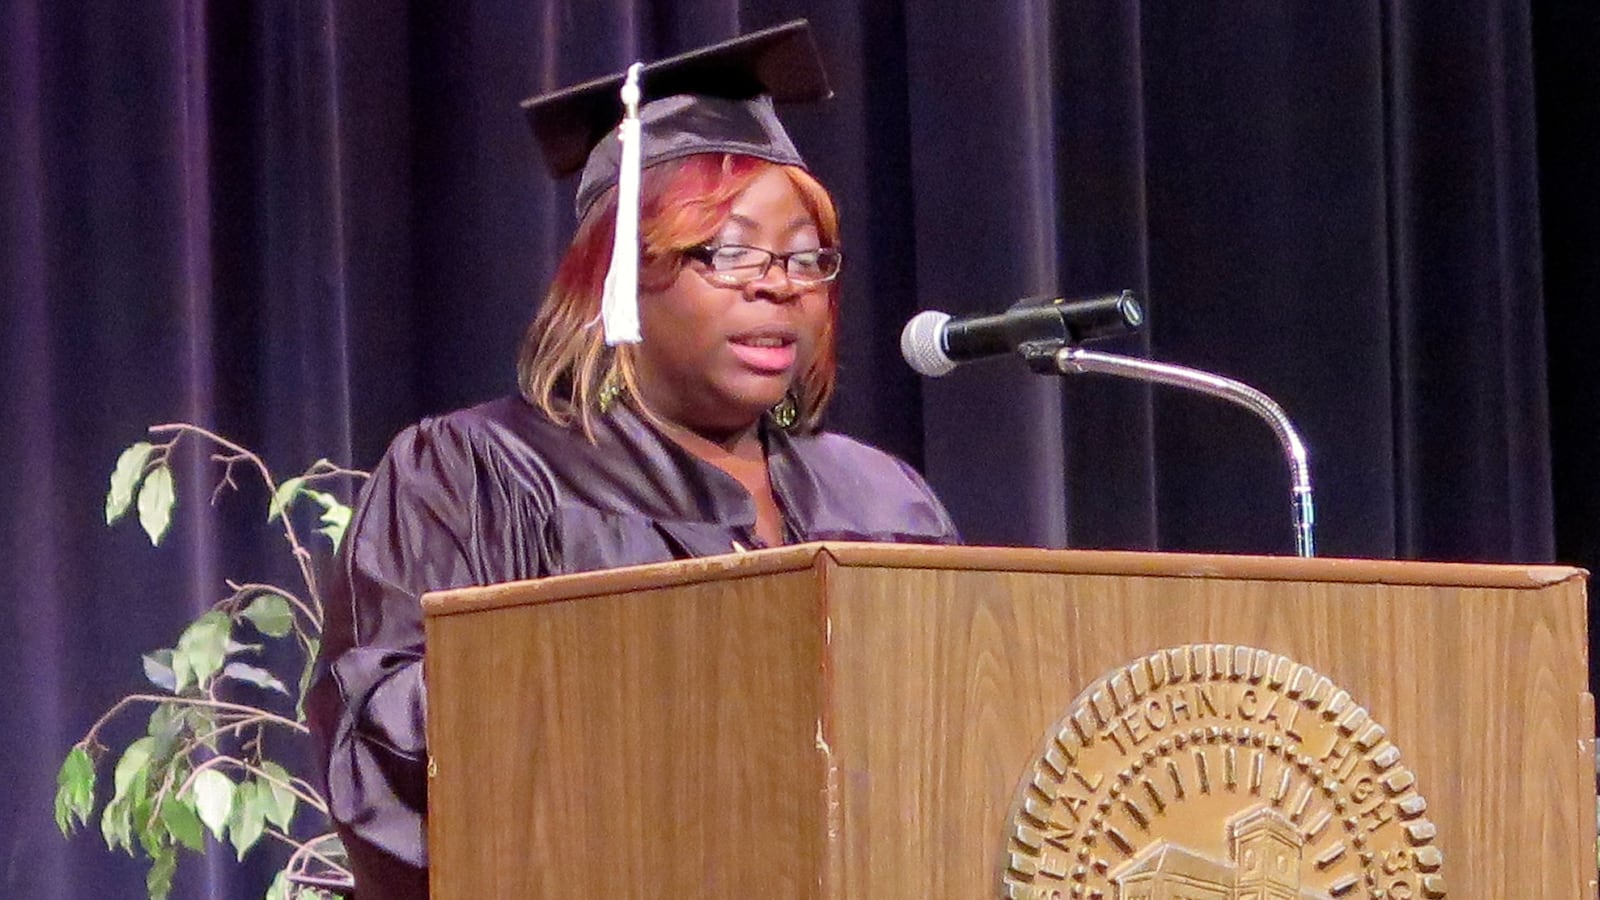 Carmellia Fleming gives a graduation speech at Indianapolis Public Schools' adult basic education ceremony. The district's programs will soon be taken over by nearby townships.